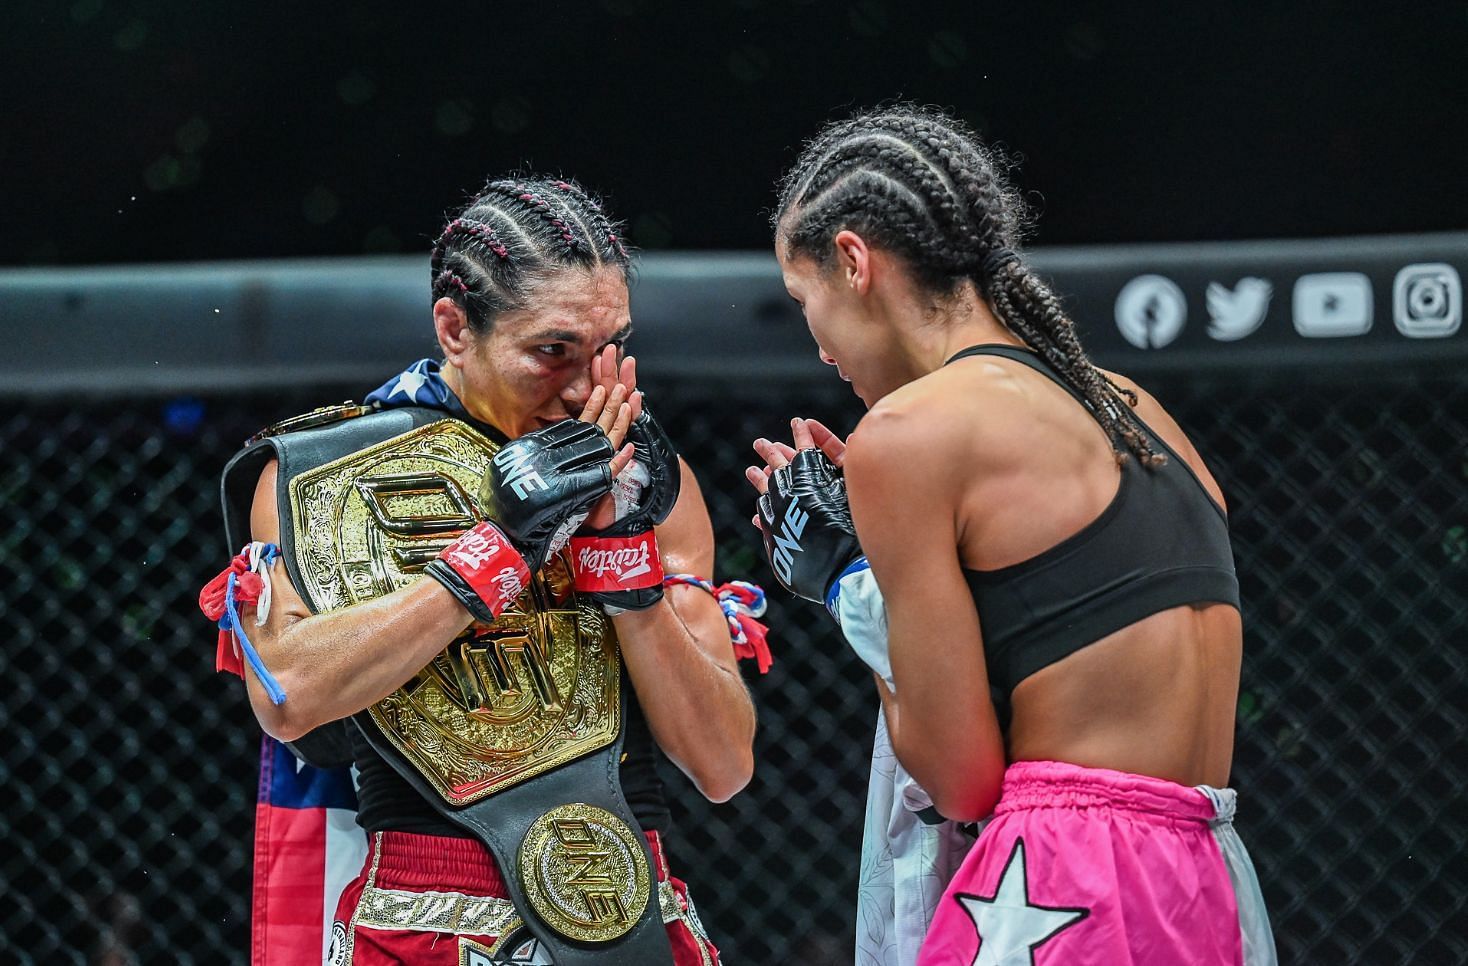 Janet Todd (L) pulled away in the championship rounds against Lara Fernandez (R) to become the interim atomweight Muay Thai world champion. | Photo by ONE Championship